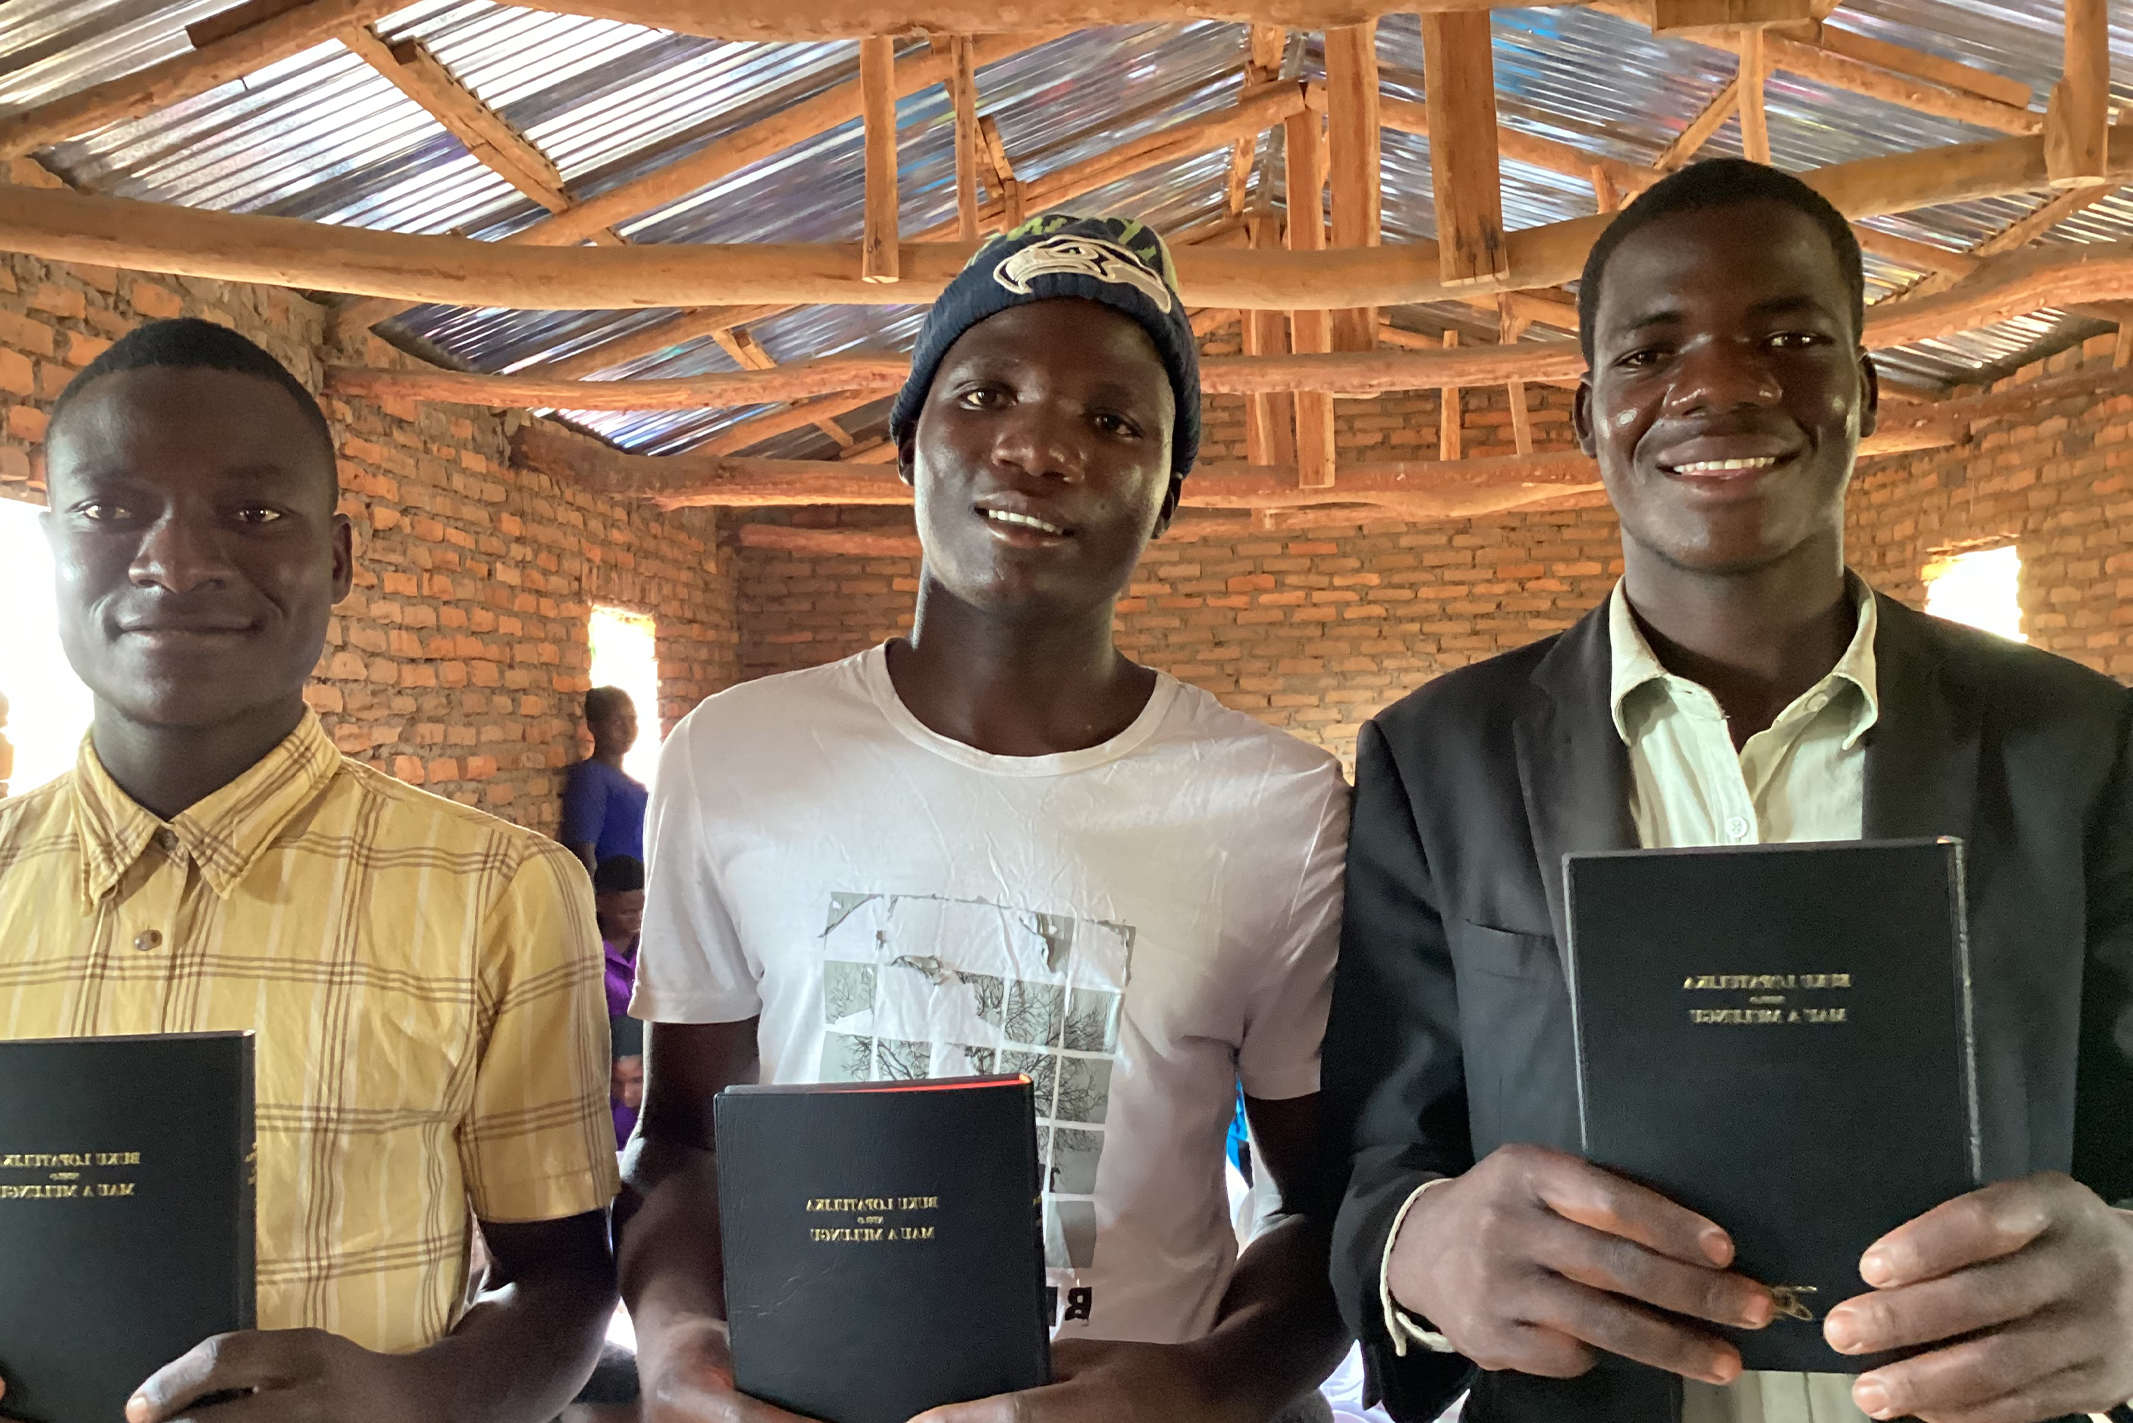 Teenage Christians in Malawi holding their Bibles while standing in their church which is made of clay bricks and a tin roof